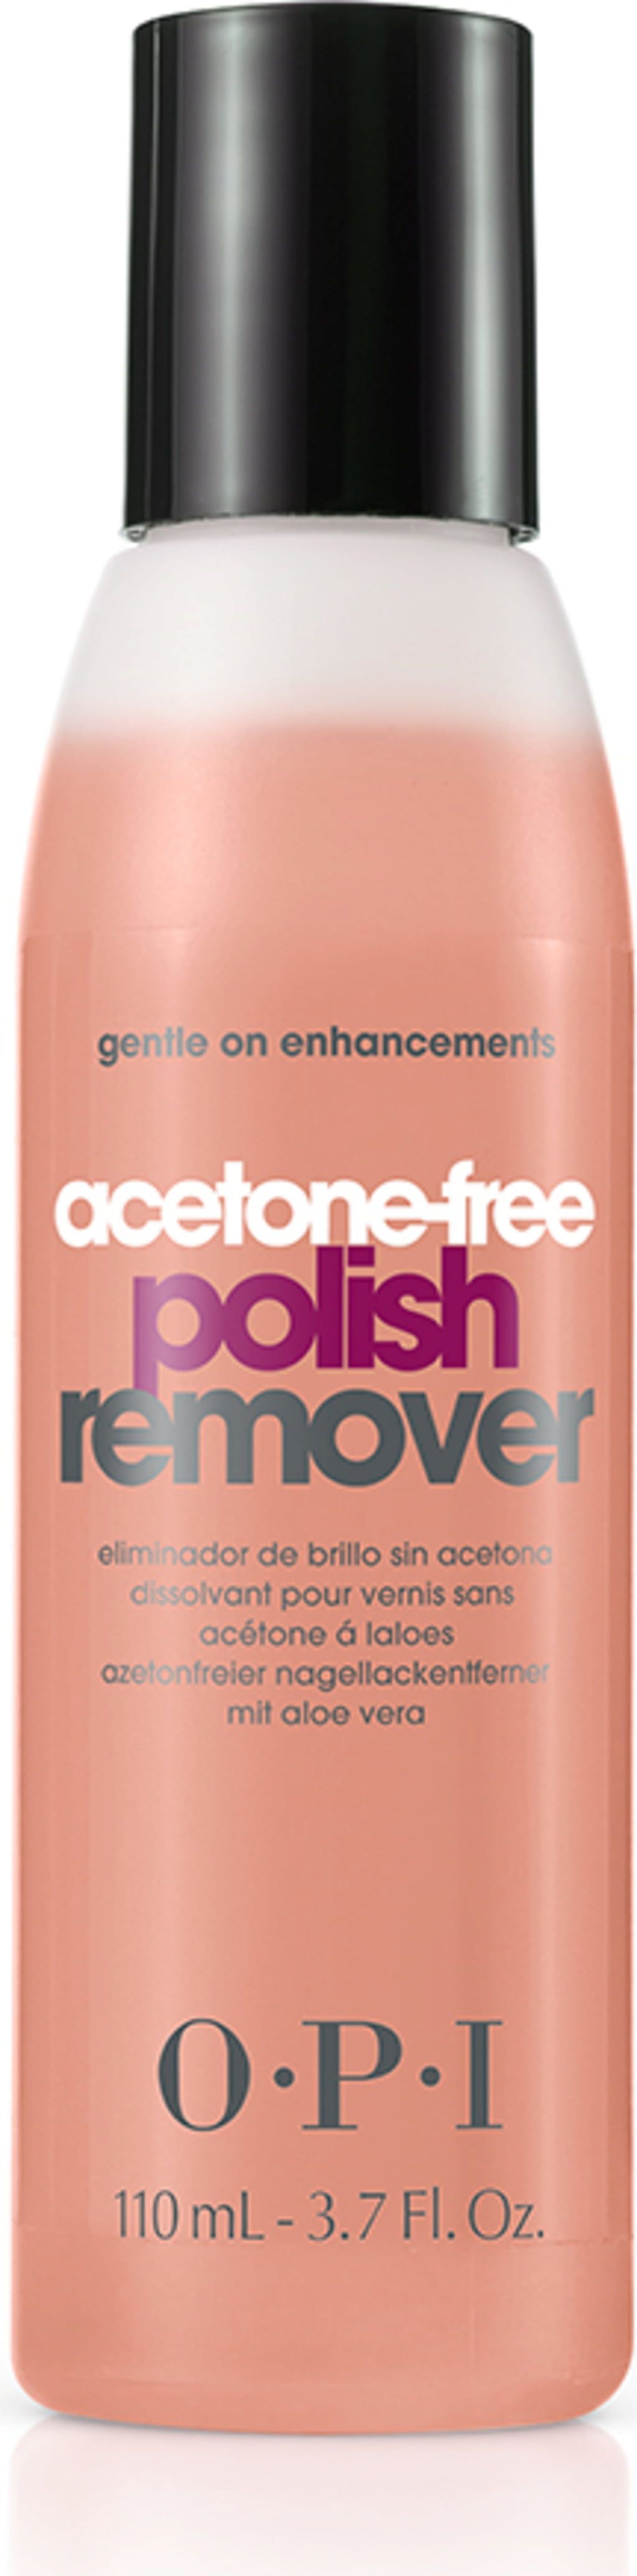 Nail Polish Remover – well&belle natural beauty